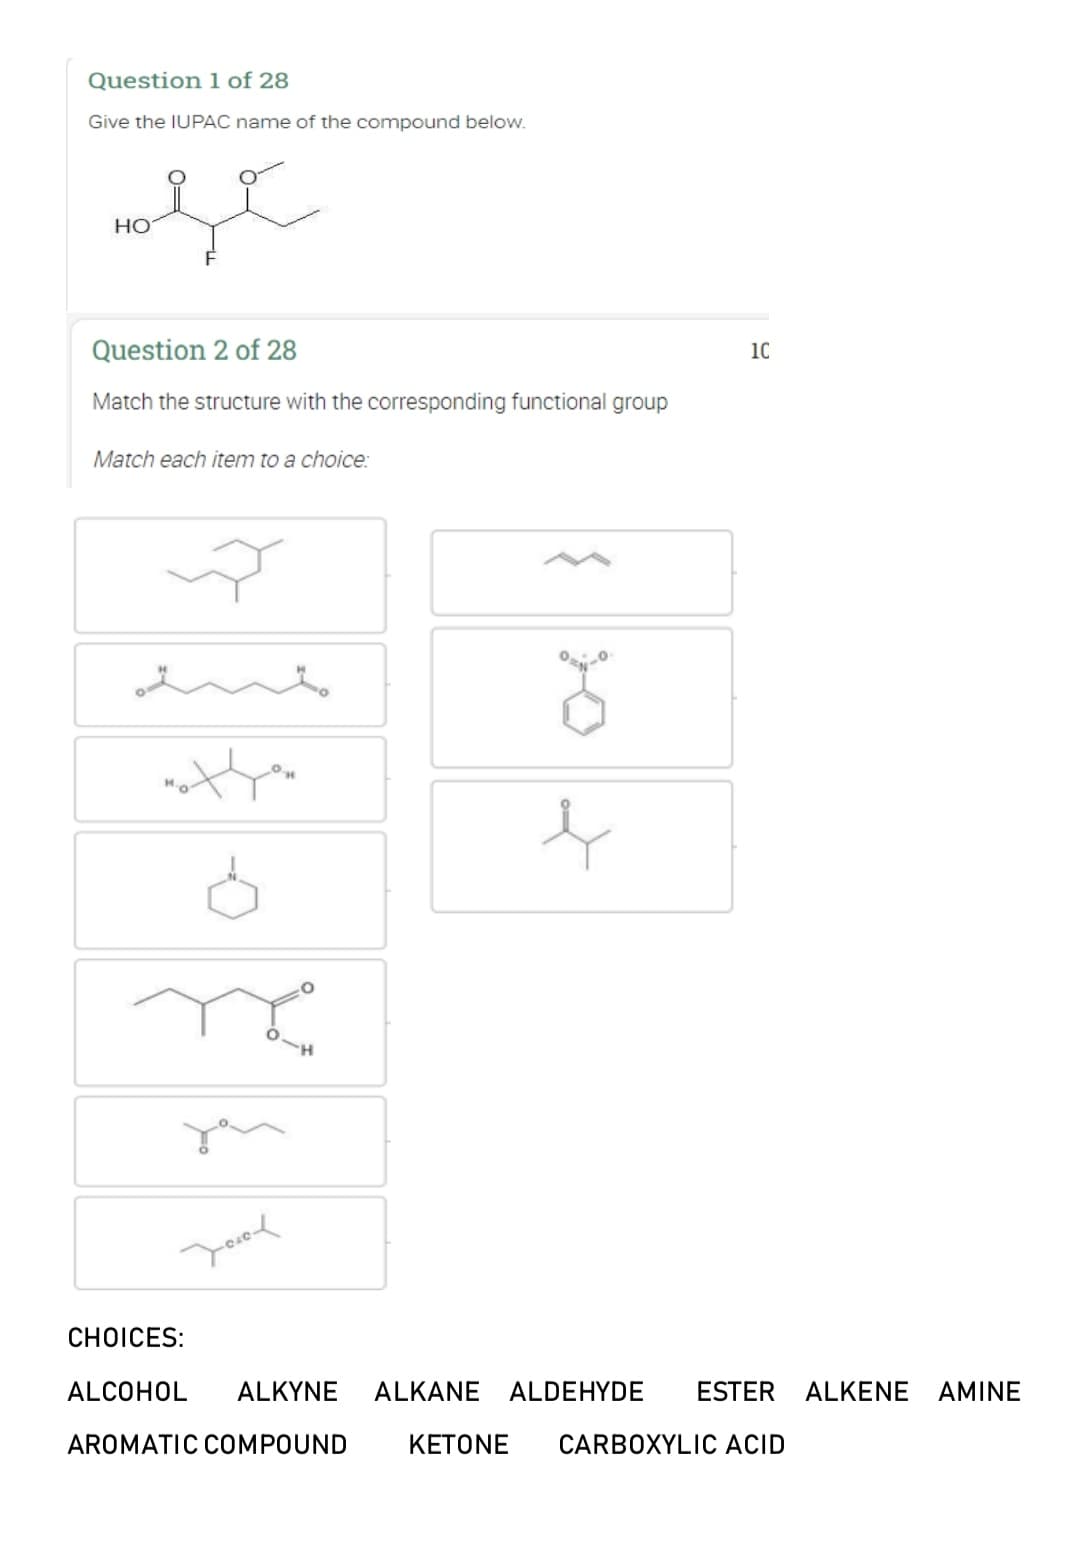 Question 1 of 28
Give the IUPAC name of the compound below.
se
HO
Question 2 of 28
Match the structure with the corresponding functional group
Match each item to a choice:
not you
8
Jool
8
e
1C
CHOICES:
ALCOHOL ALKYNE ALKANE ALDEHYDE ESTER ALKENE AMINE
AROMATIC COMPOUND
KETONE CARBOXYLIC ACID